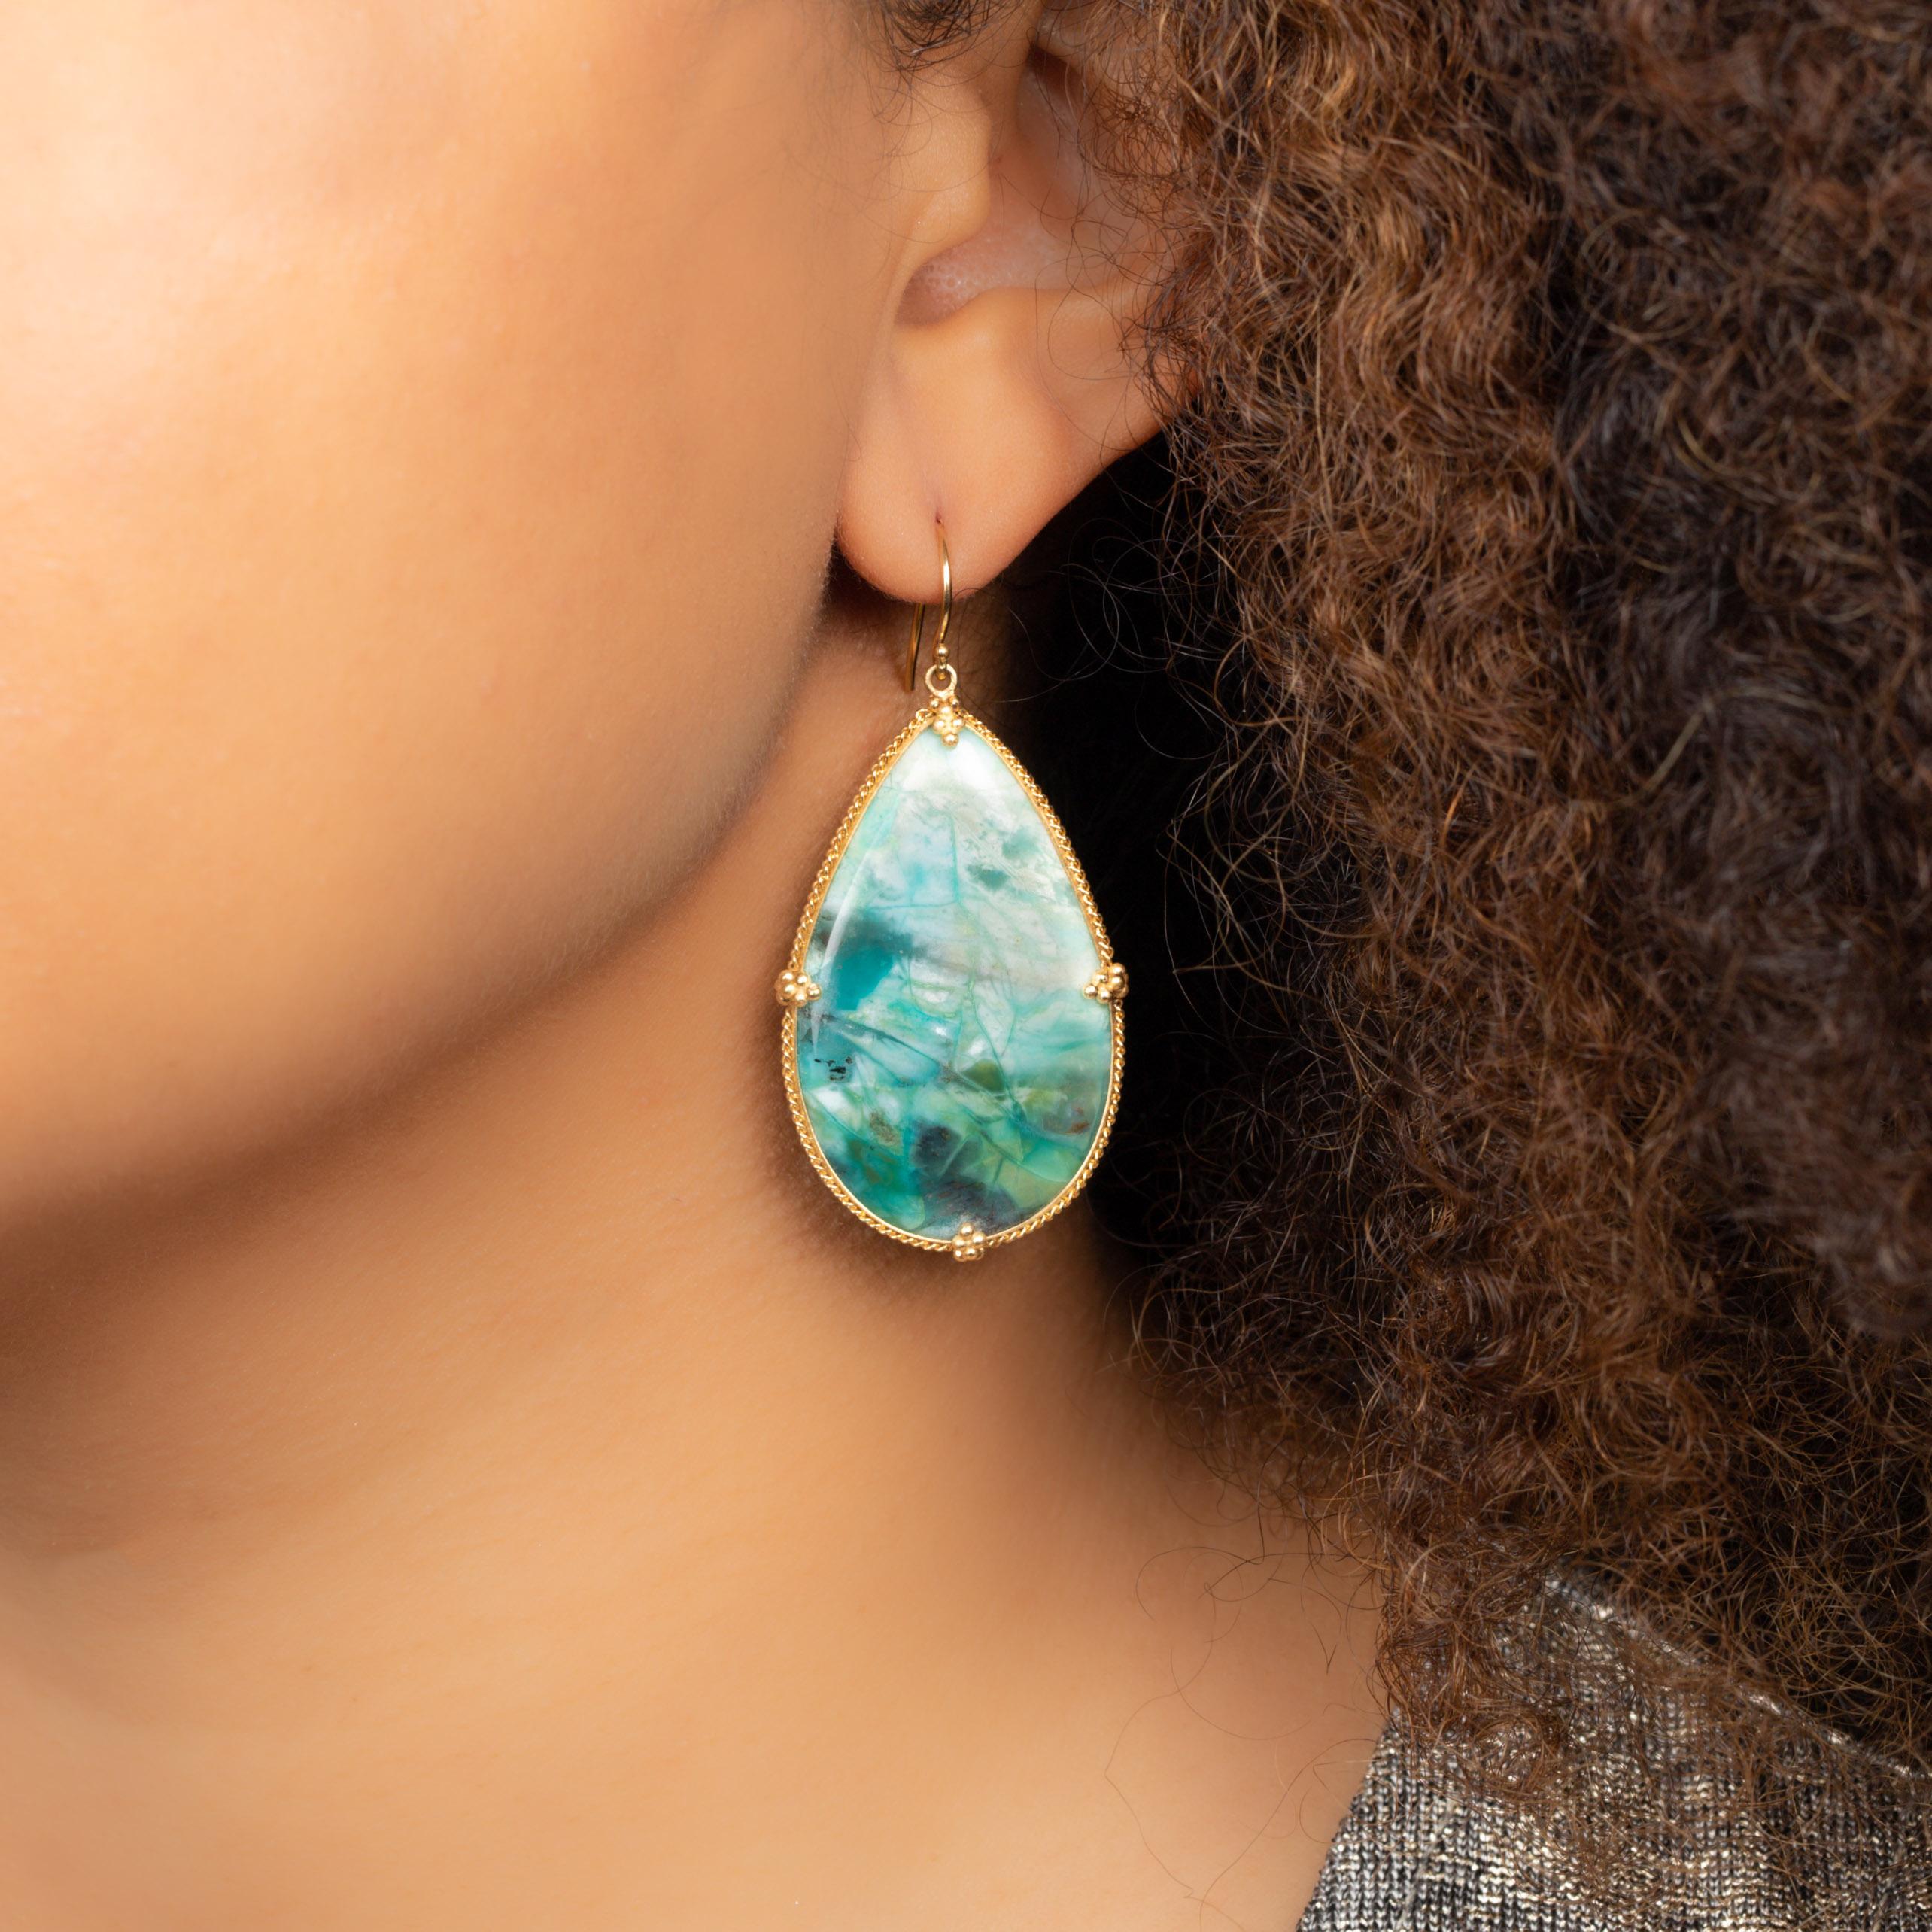 These extraordinary earrings feature large and luscious teardrops of Petrified Wood with Blue Opal. It’s a distinctive and unusual material, a captivating stone the color of a tropical lagoon with swirls of shadow and light. The two spectacular gems